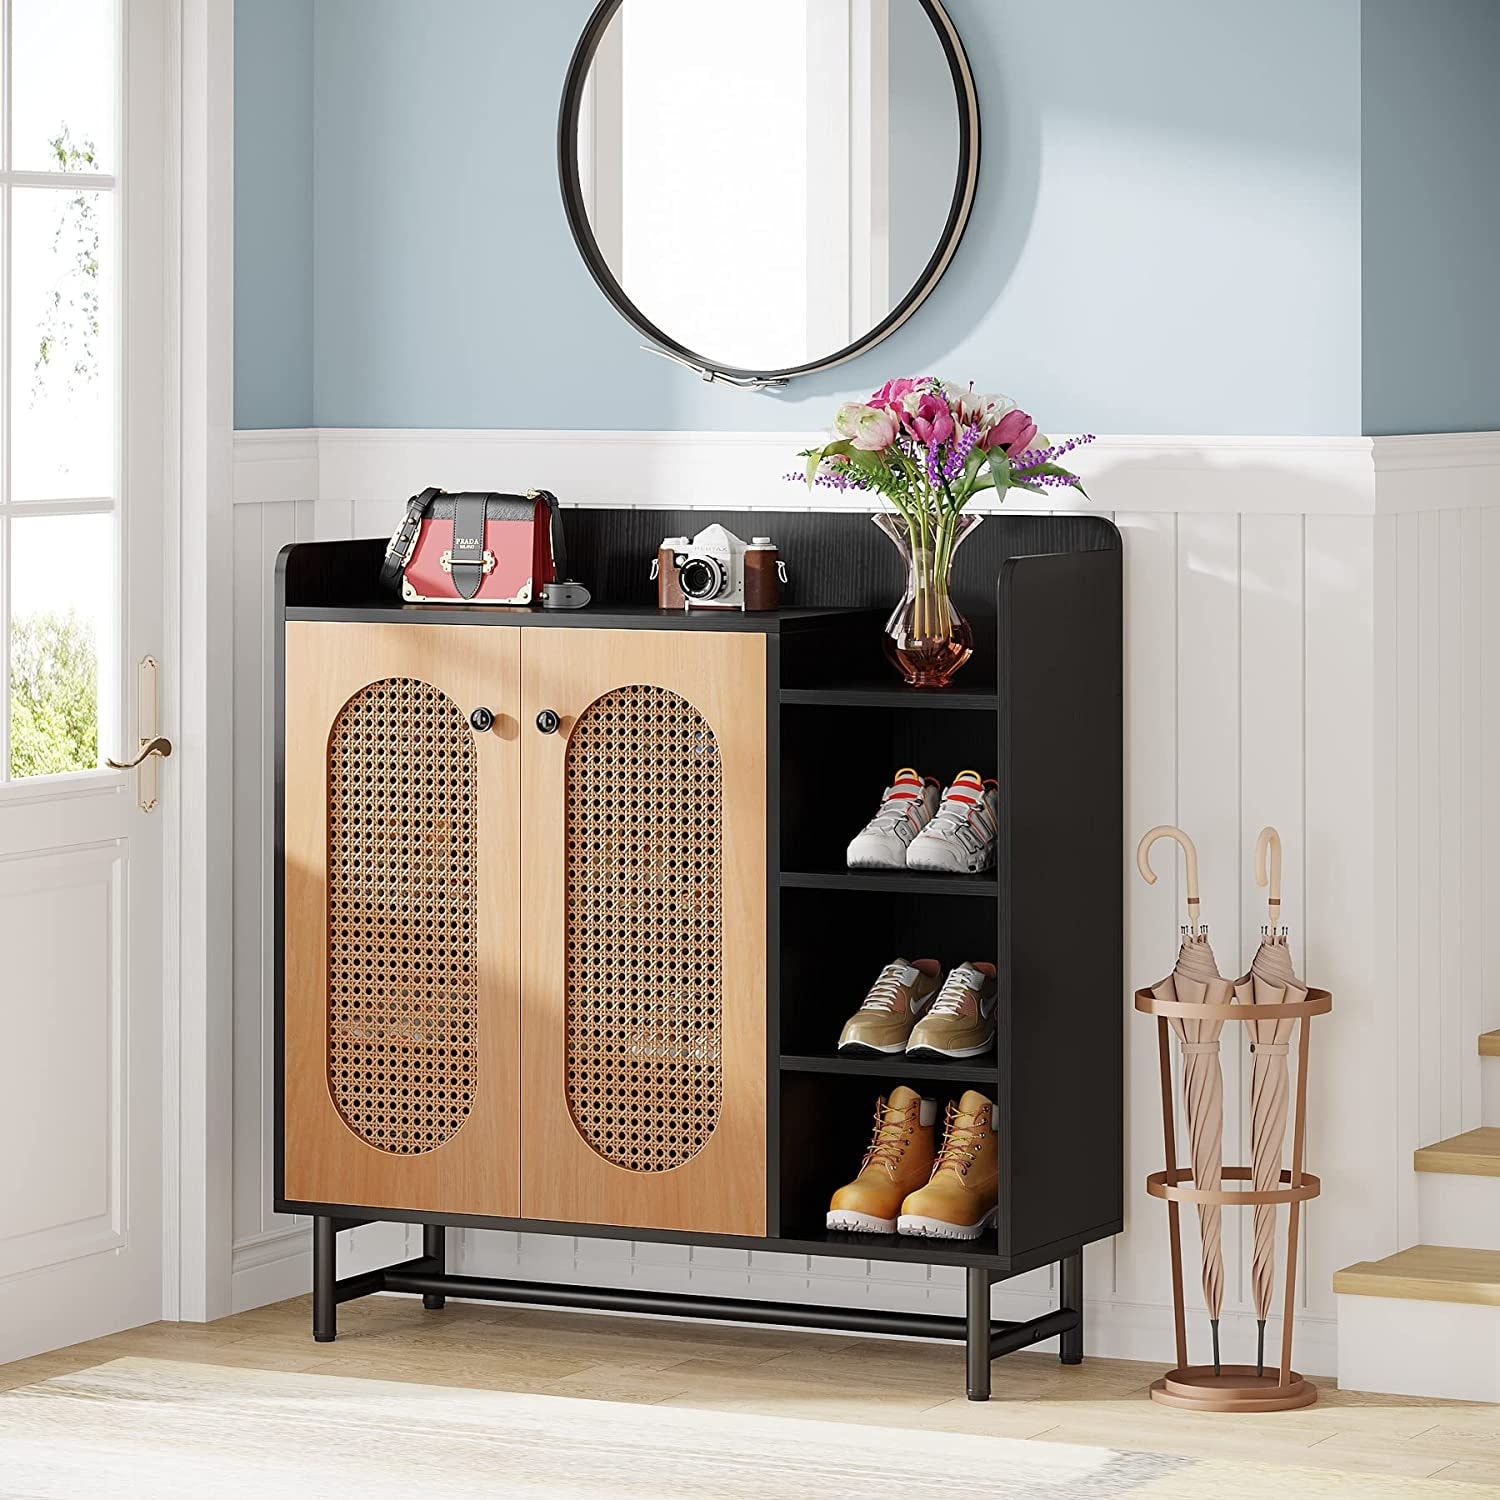 https://ak1.ostkcdn.com/images/products/is/images/direct/f47815a916bceae718b6add77a5b197e9649d38d/Shoe-Cabinet-with-Doors-and-Open-Storage-Shelf-by-Lee-Furniture.jpg